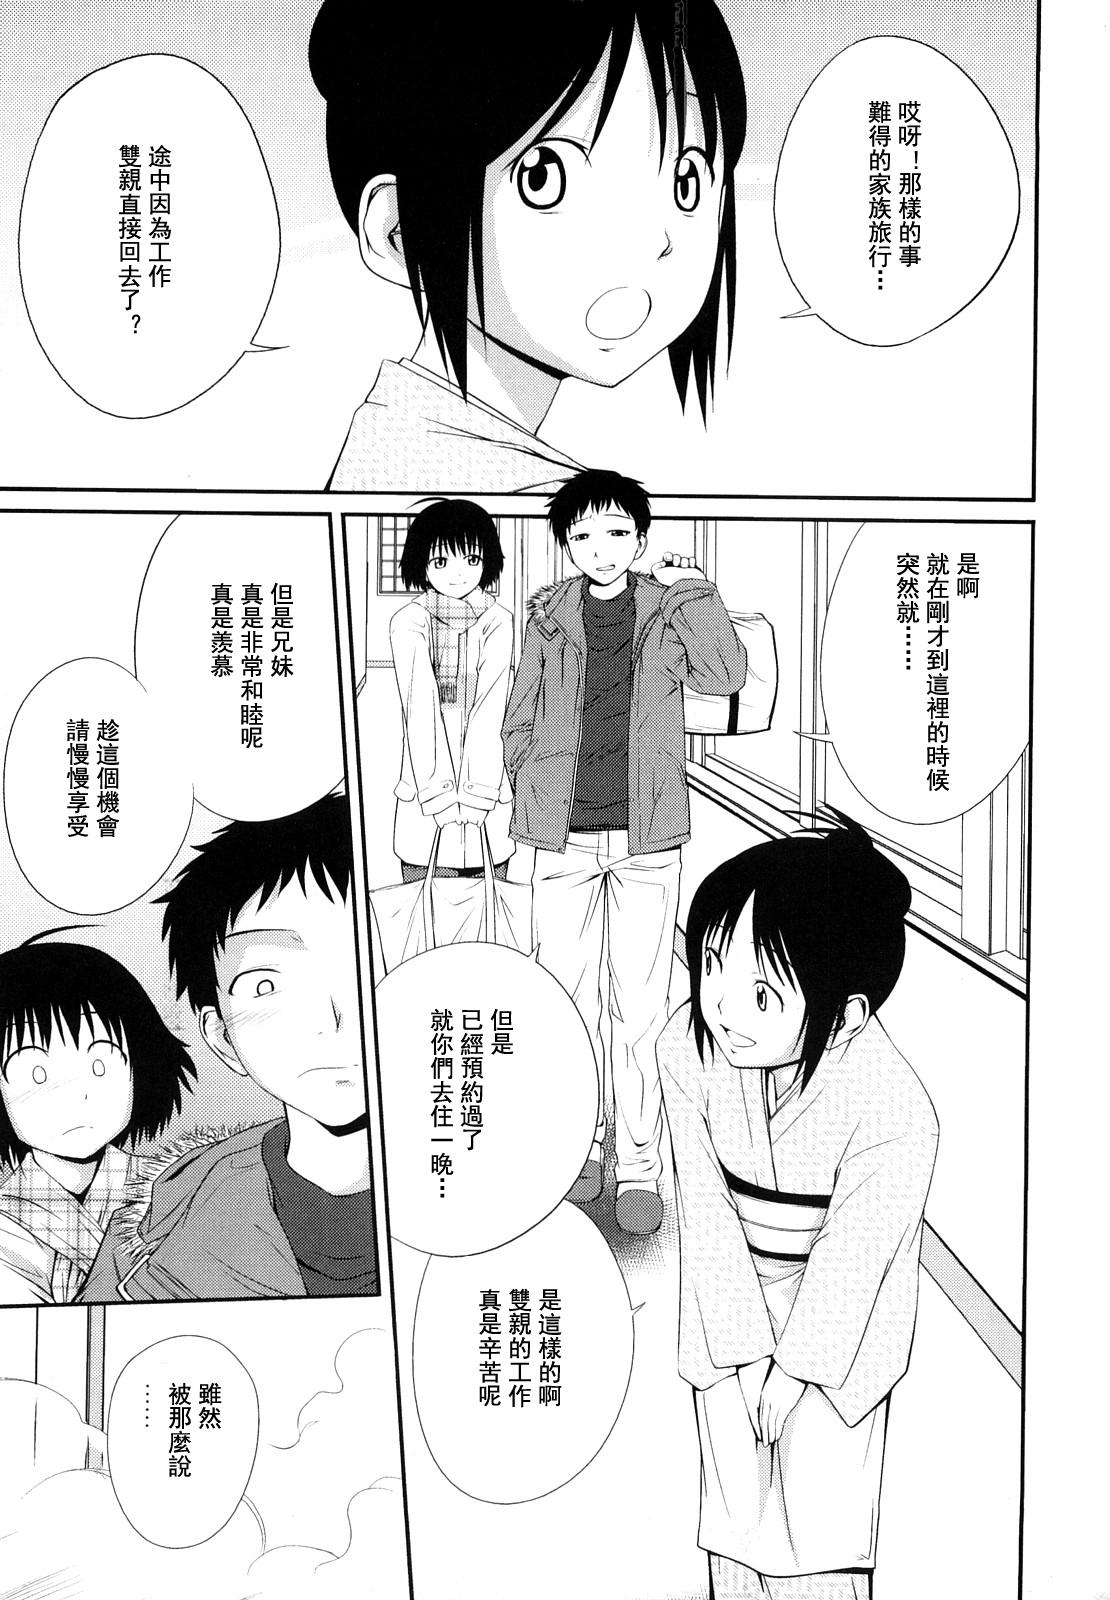 Sister Mix Ch. 1-2 7